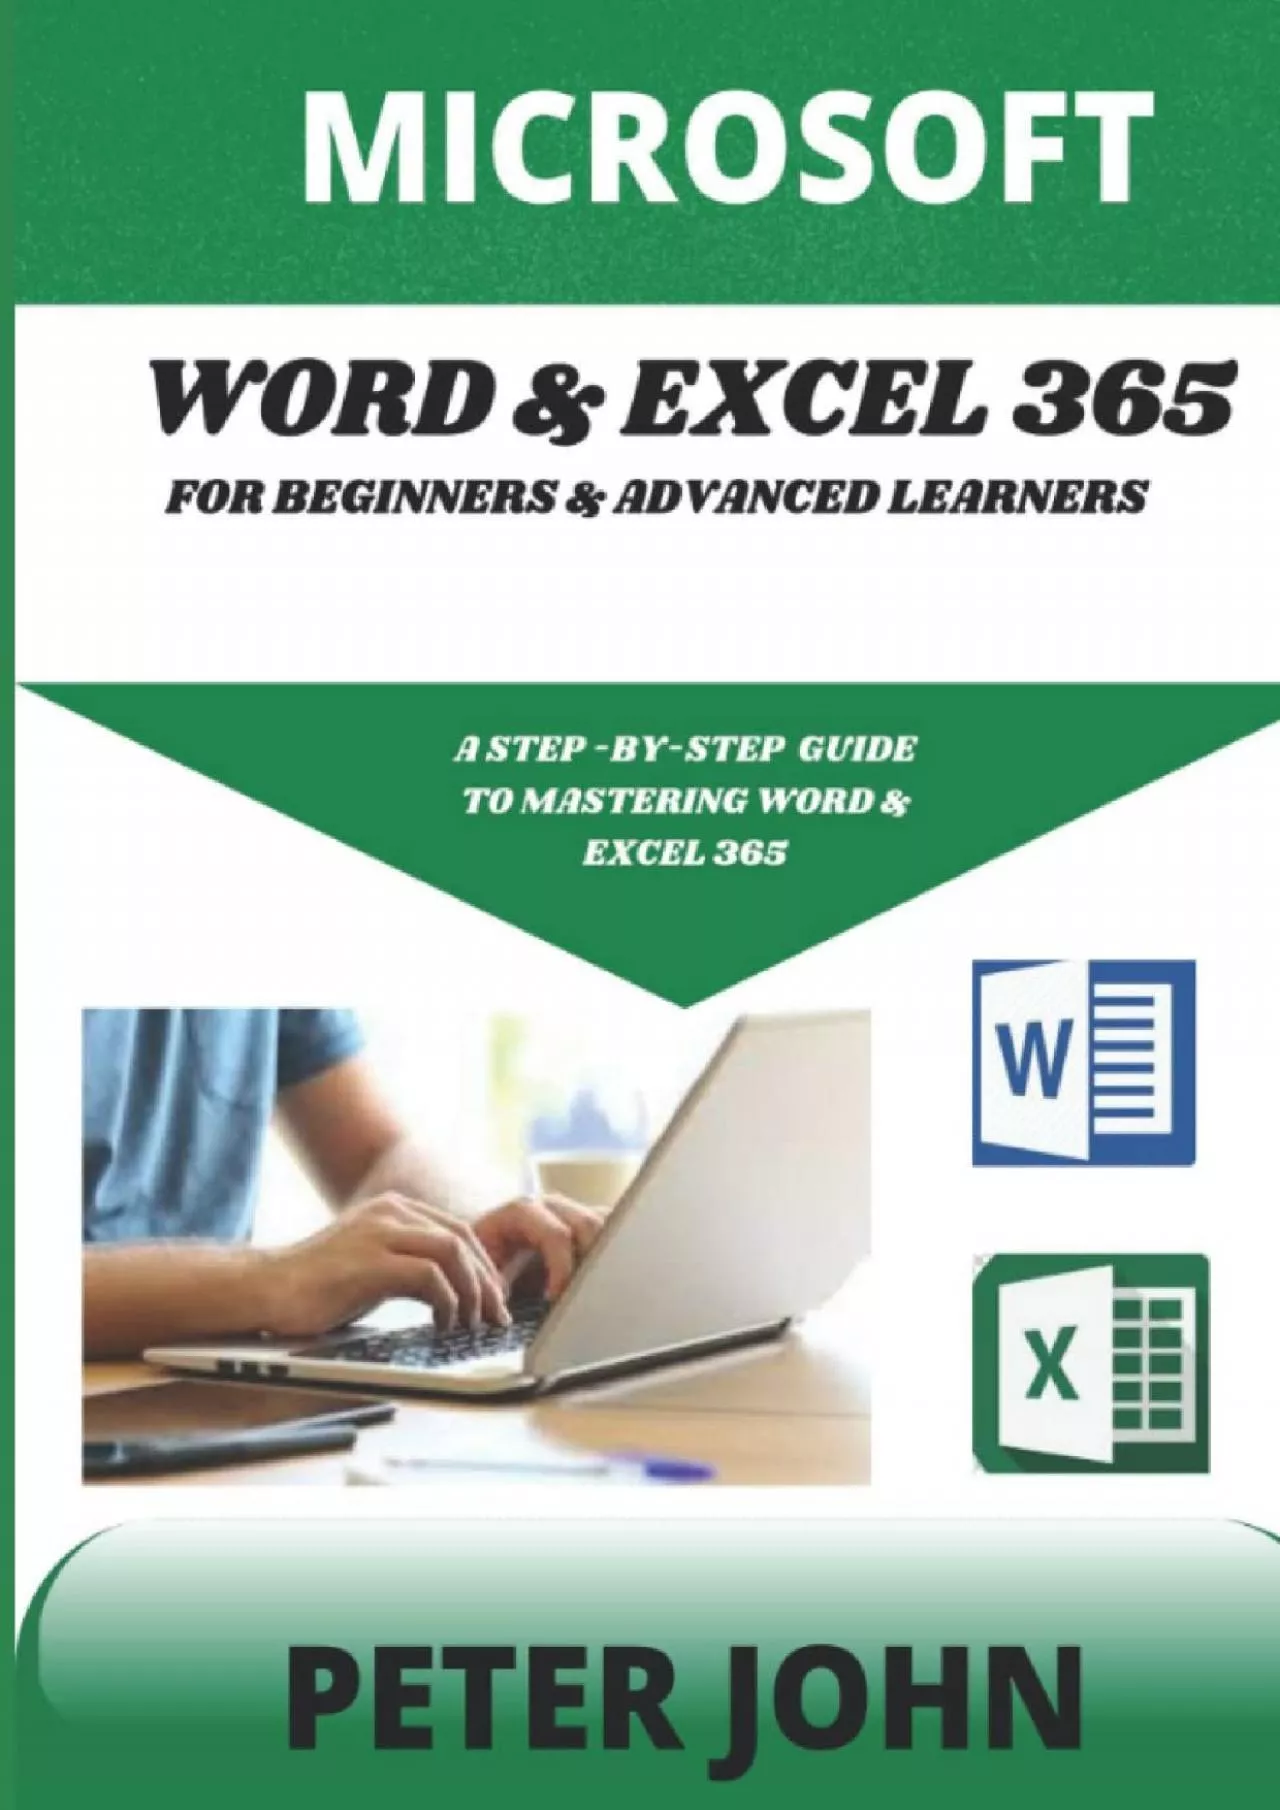 (BOOK)-MICROSOFT WORD  EXEL 365 FOR BEGINNERS  ADVANCED LEARNERS: A STEP-BY-STEP PRACTICAL